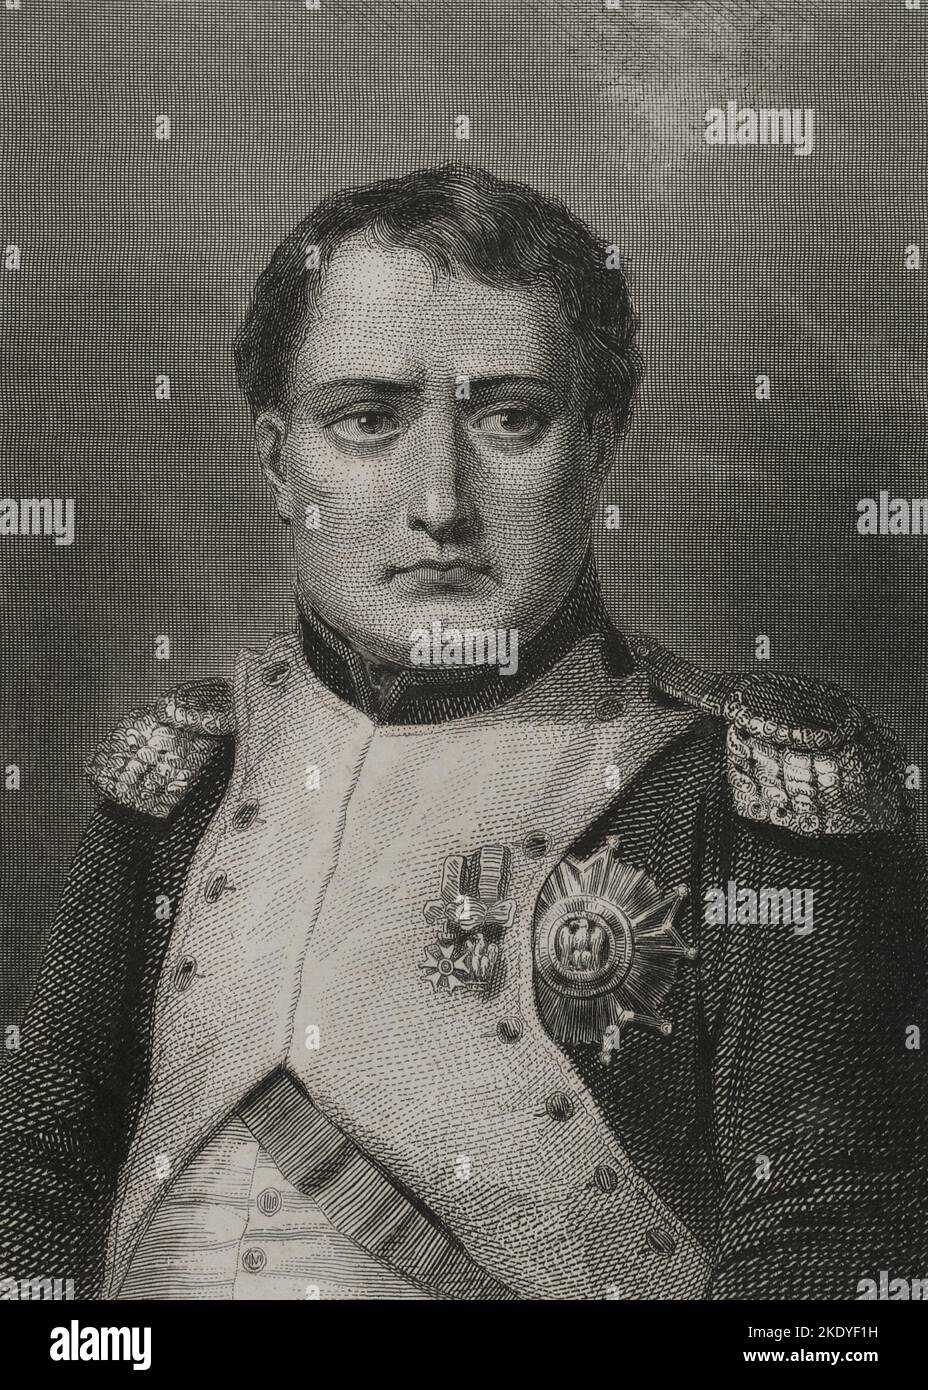 Napoleon Bonaparte (1769-1821). French military and political leader. As Napoleon I, he was Emperor of France (1804-1815). Portrait. Engraving by Geoffroy. "Historia Universal", by César Cantú. Volume VI. 1857. Stock Photo